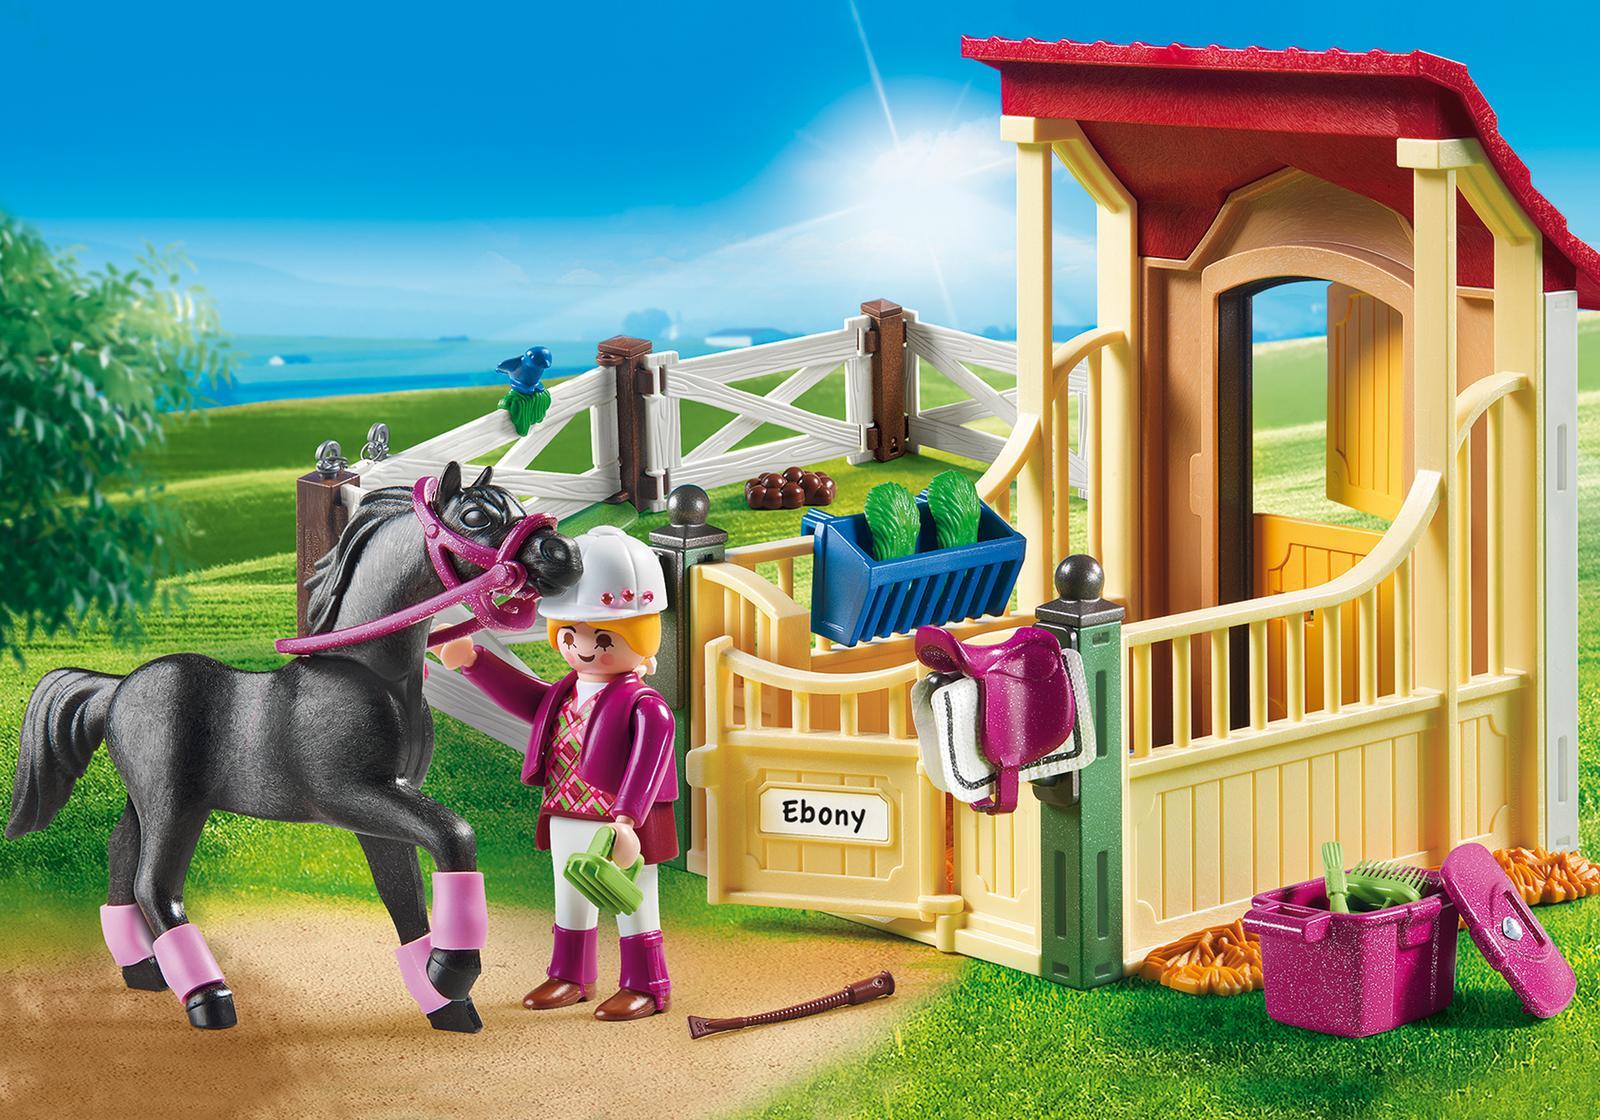 playmobil country horse